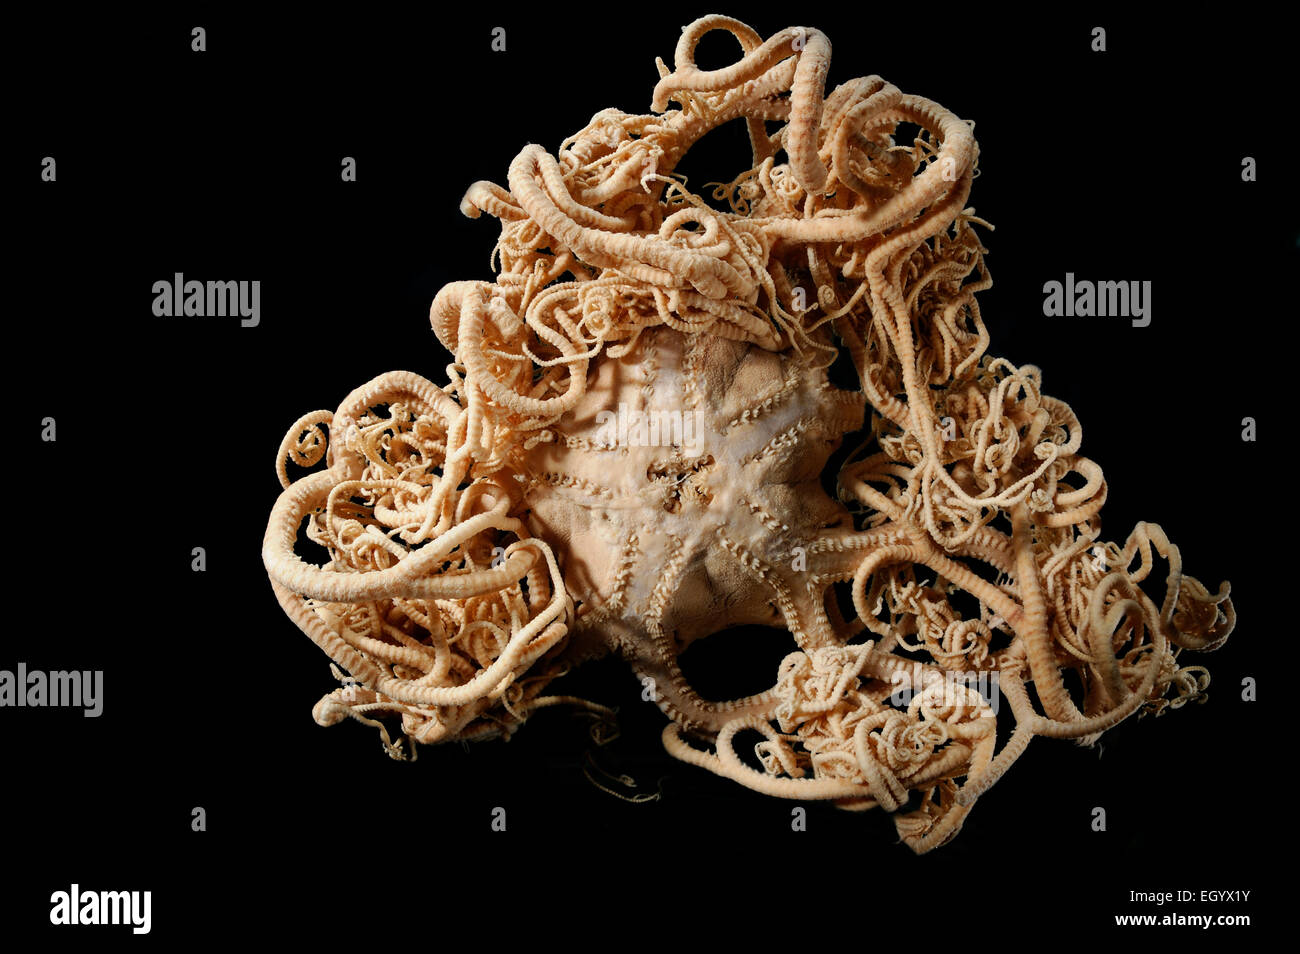 Brittle star (Gorgonocephalus lamarckii) Picture was taken in cooperation with the Zoological Museum University of Hamburg | Sch Stock Photo